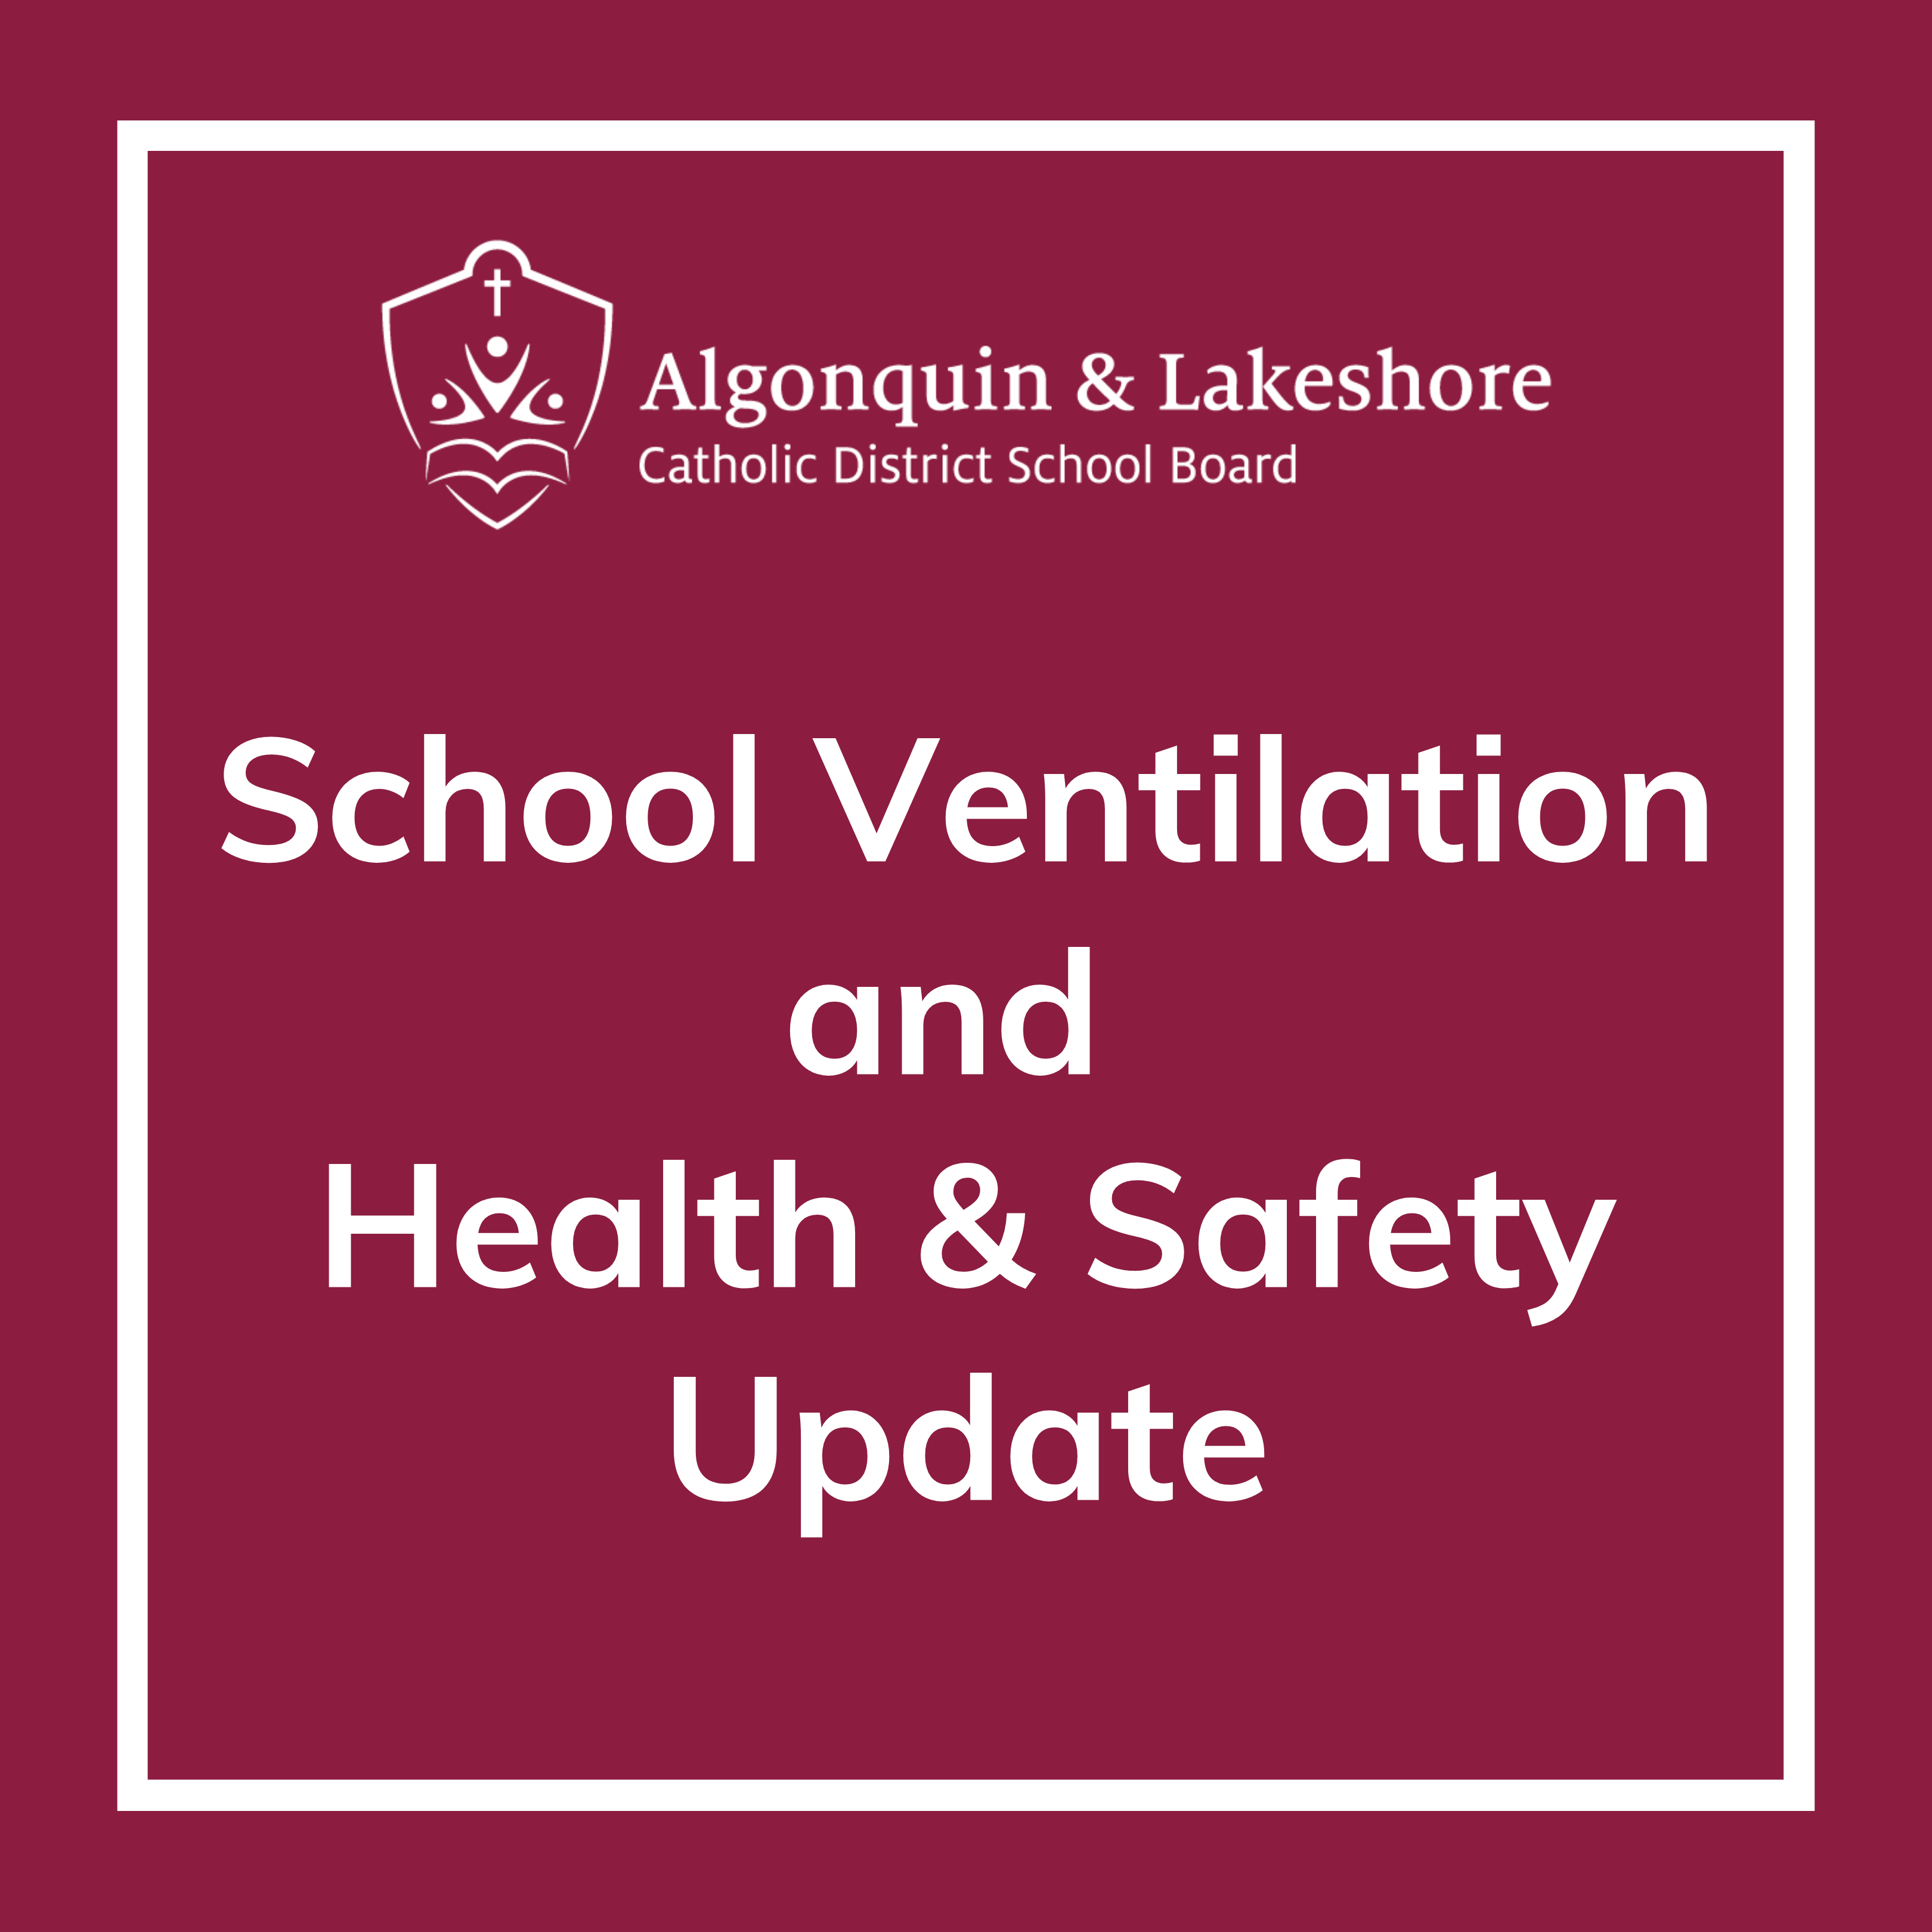 School Ventilation and Health & Safety Update